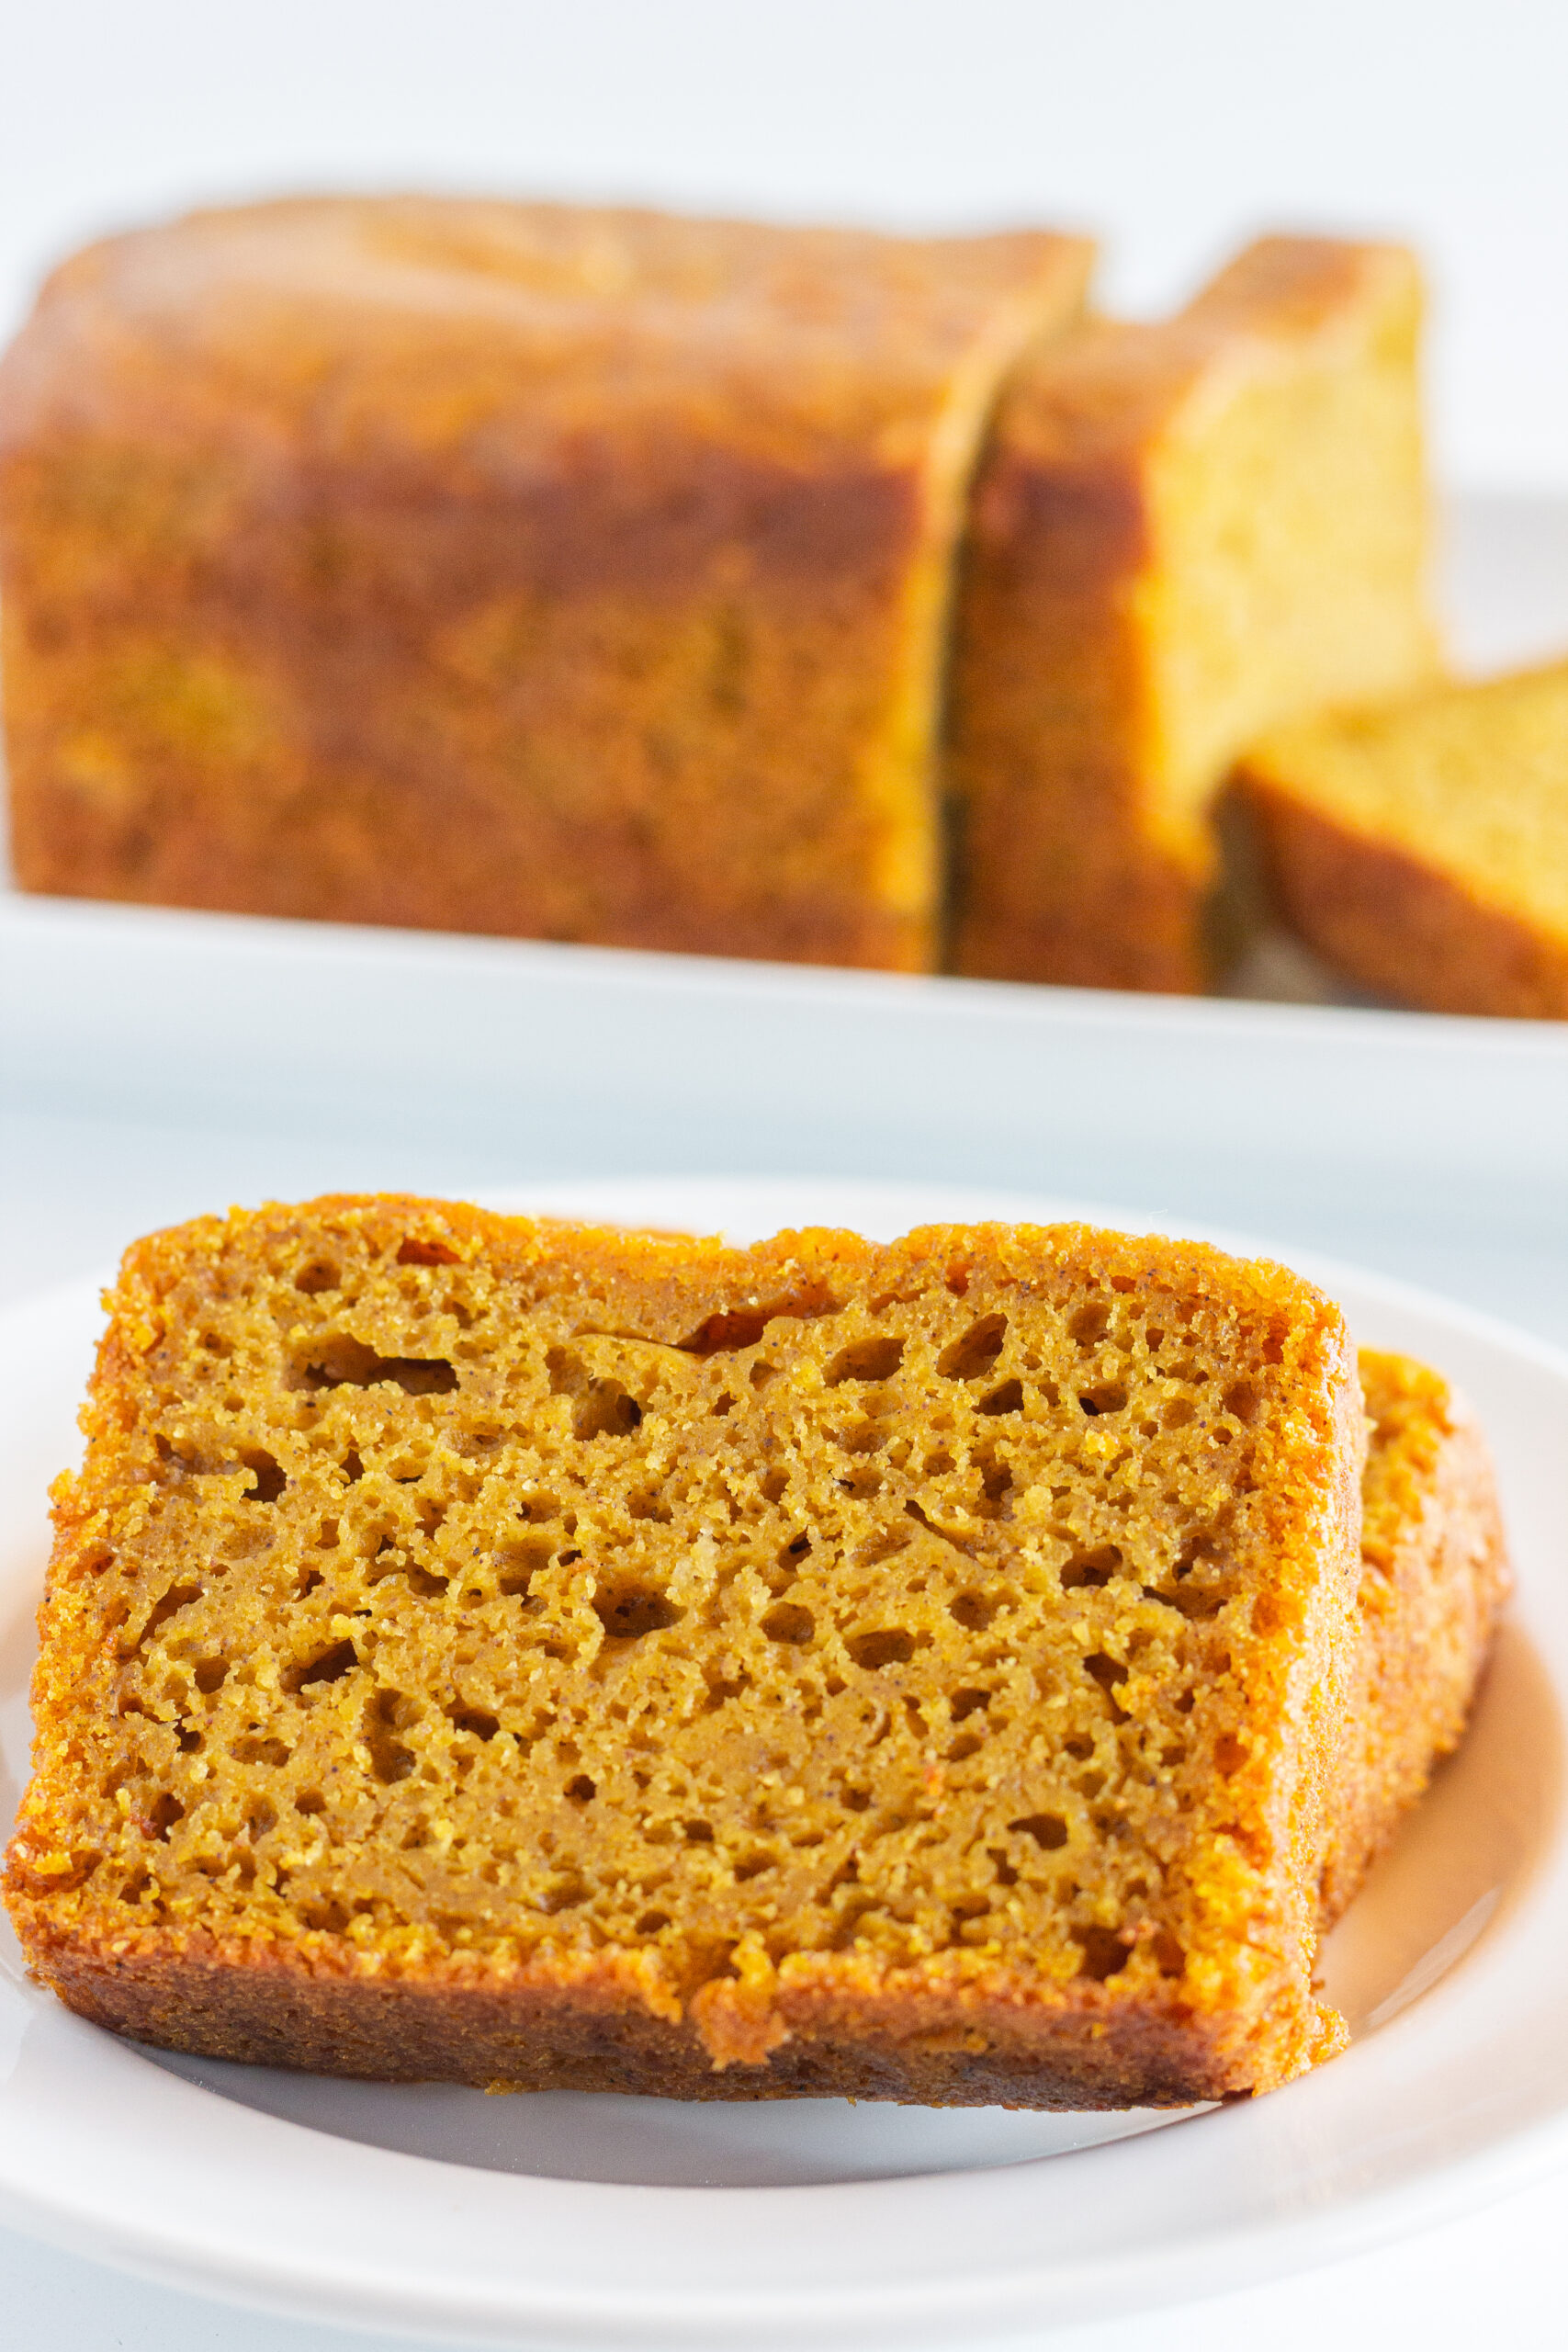 Two slices of pumpkin bread on a white plate with a loaf of pumpkin bread in the background.